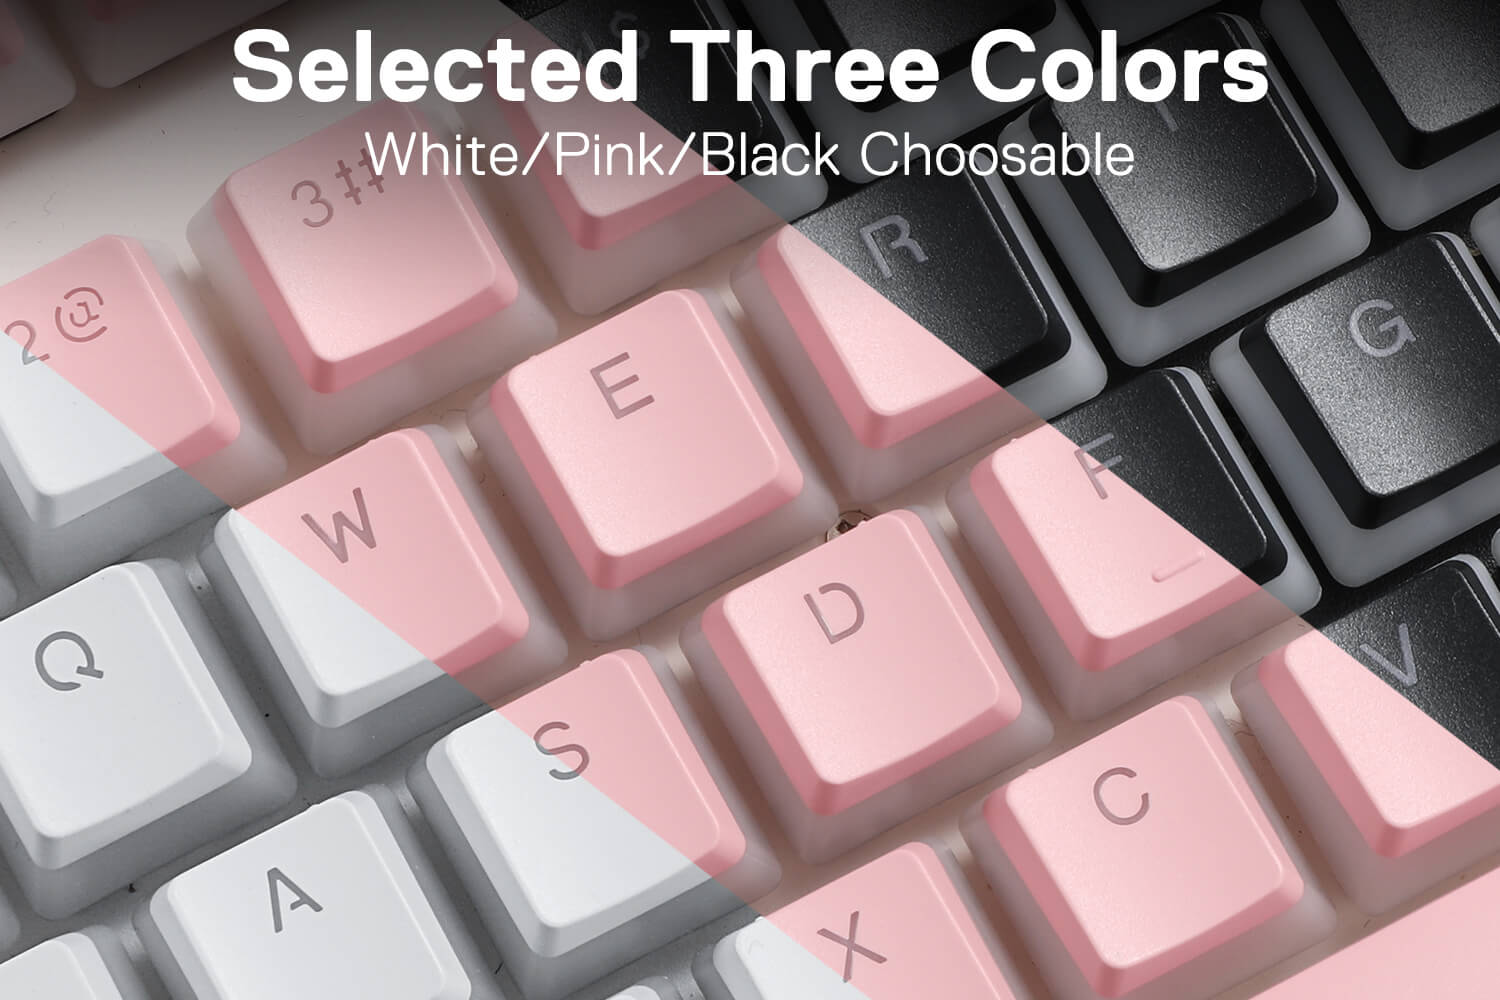 White, pink and black three colors pudding keycaps